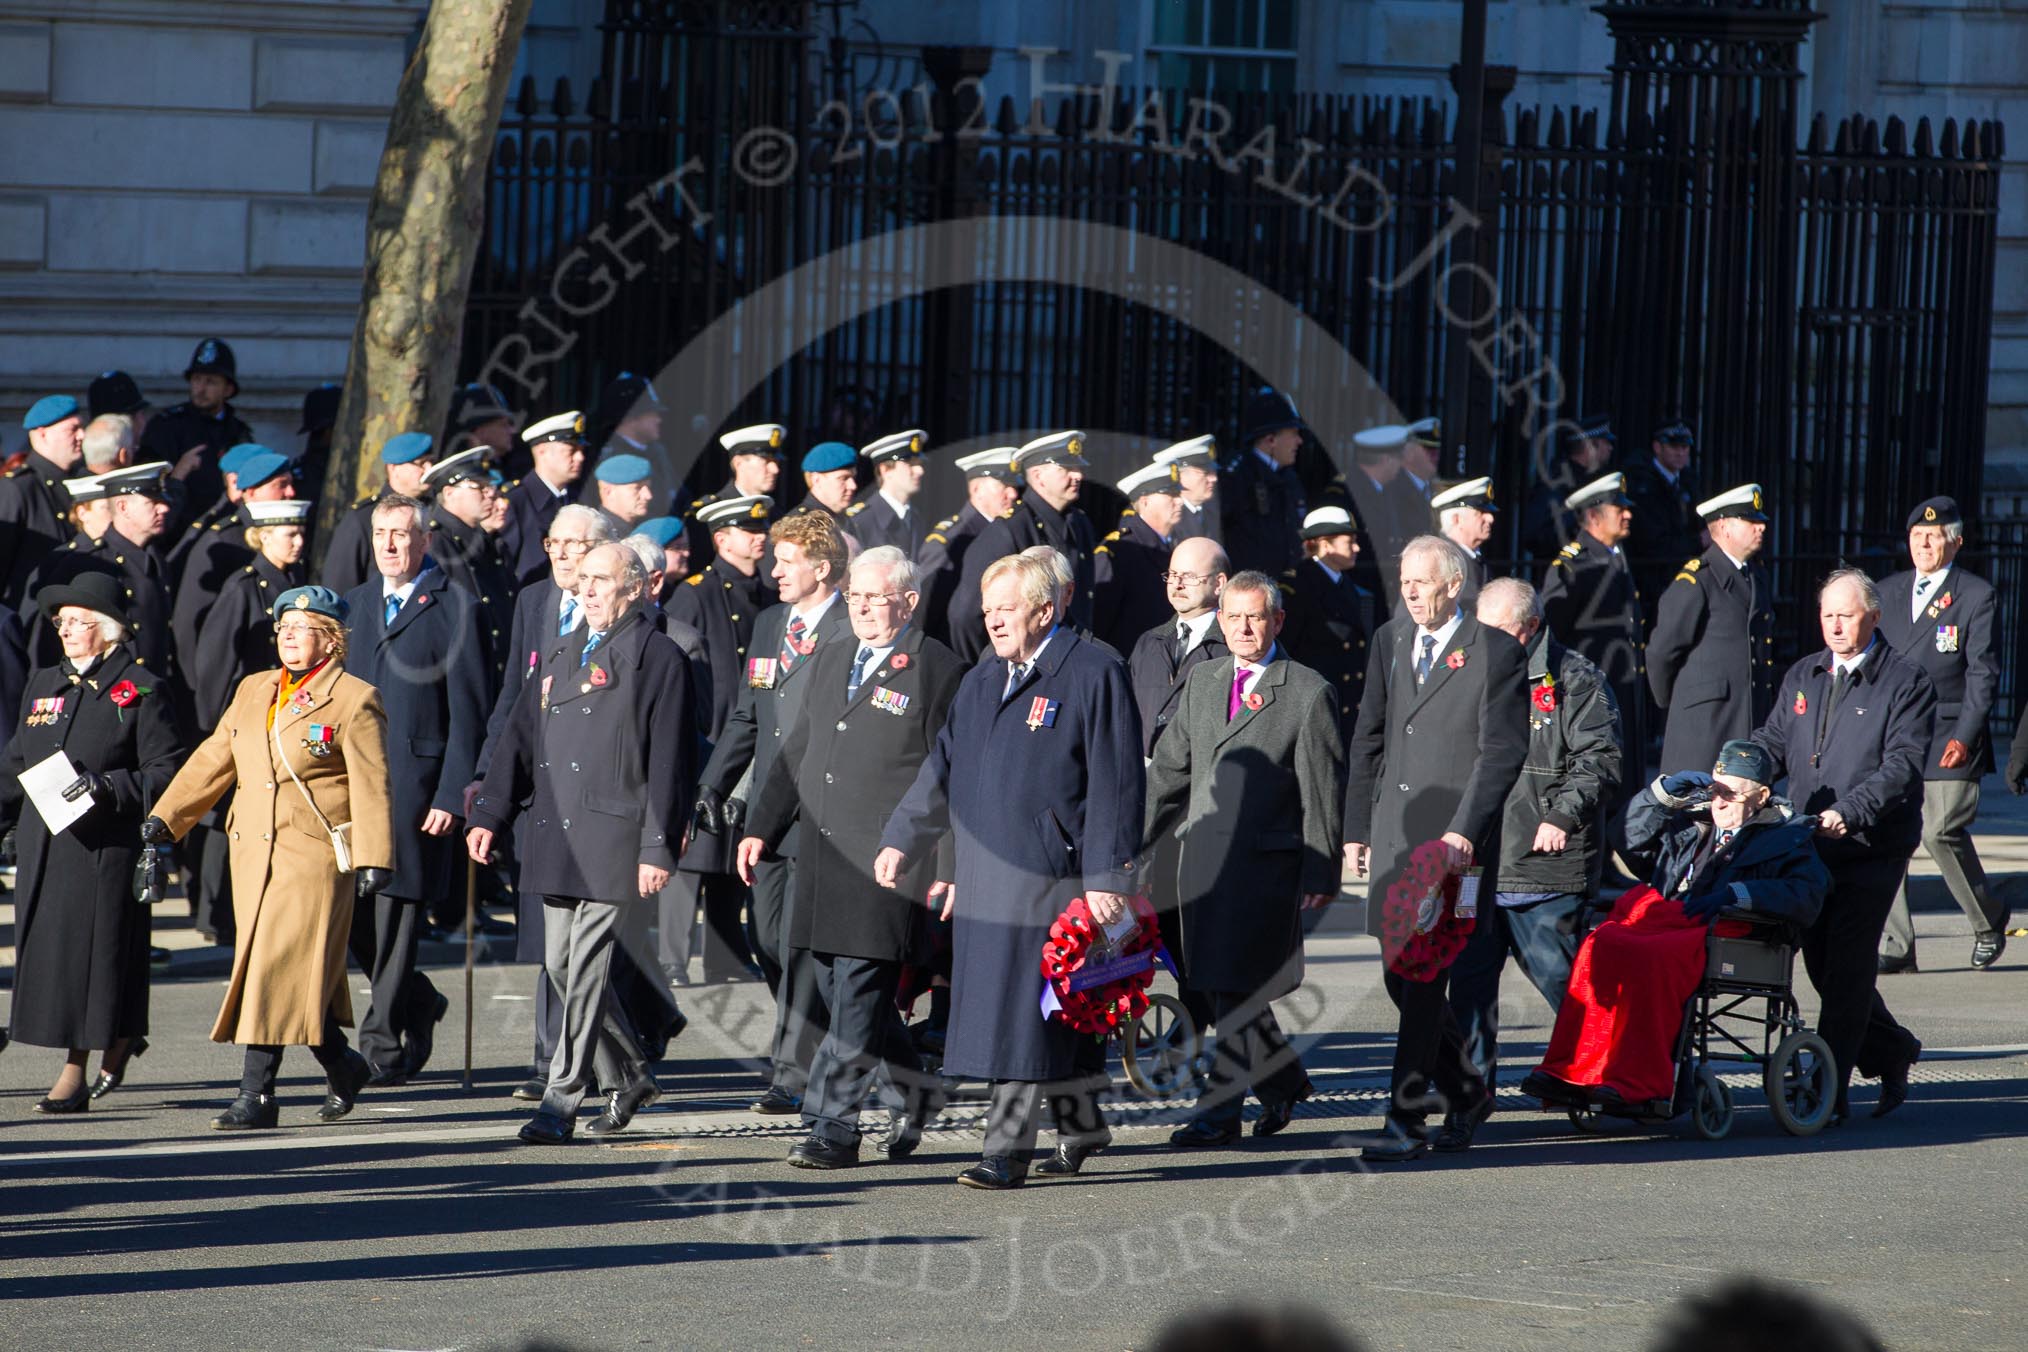 Remembrance Sunday 2012 Cenotaph March Past: Group C13 - Princess Mary's Royal Air Force Nursing Service Association and C14 - Bomber Command Association..
Whitehall, Cenotaph,
London SW1,

United Kingdom,
on 11 November 2012 at 12:02, image #1123